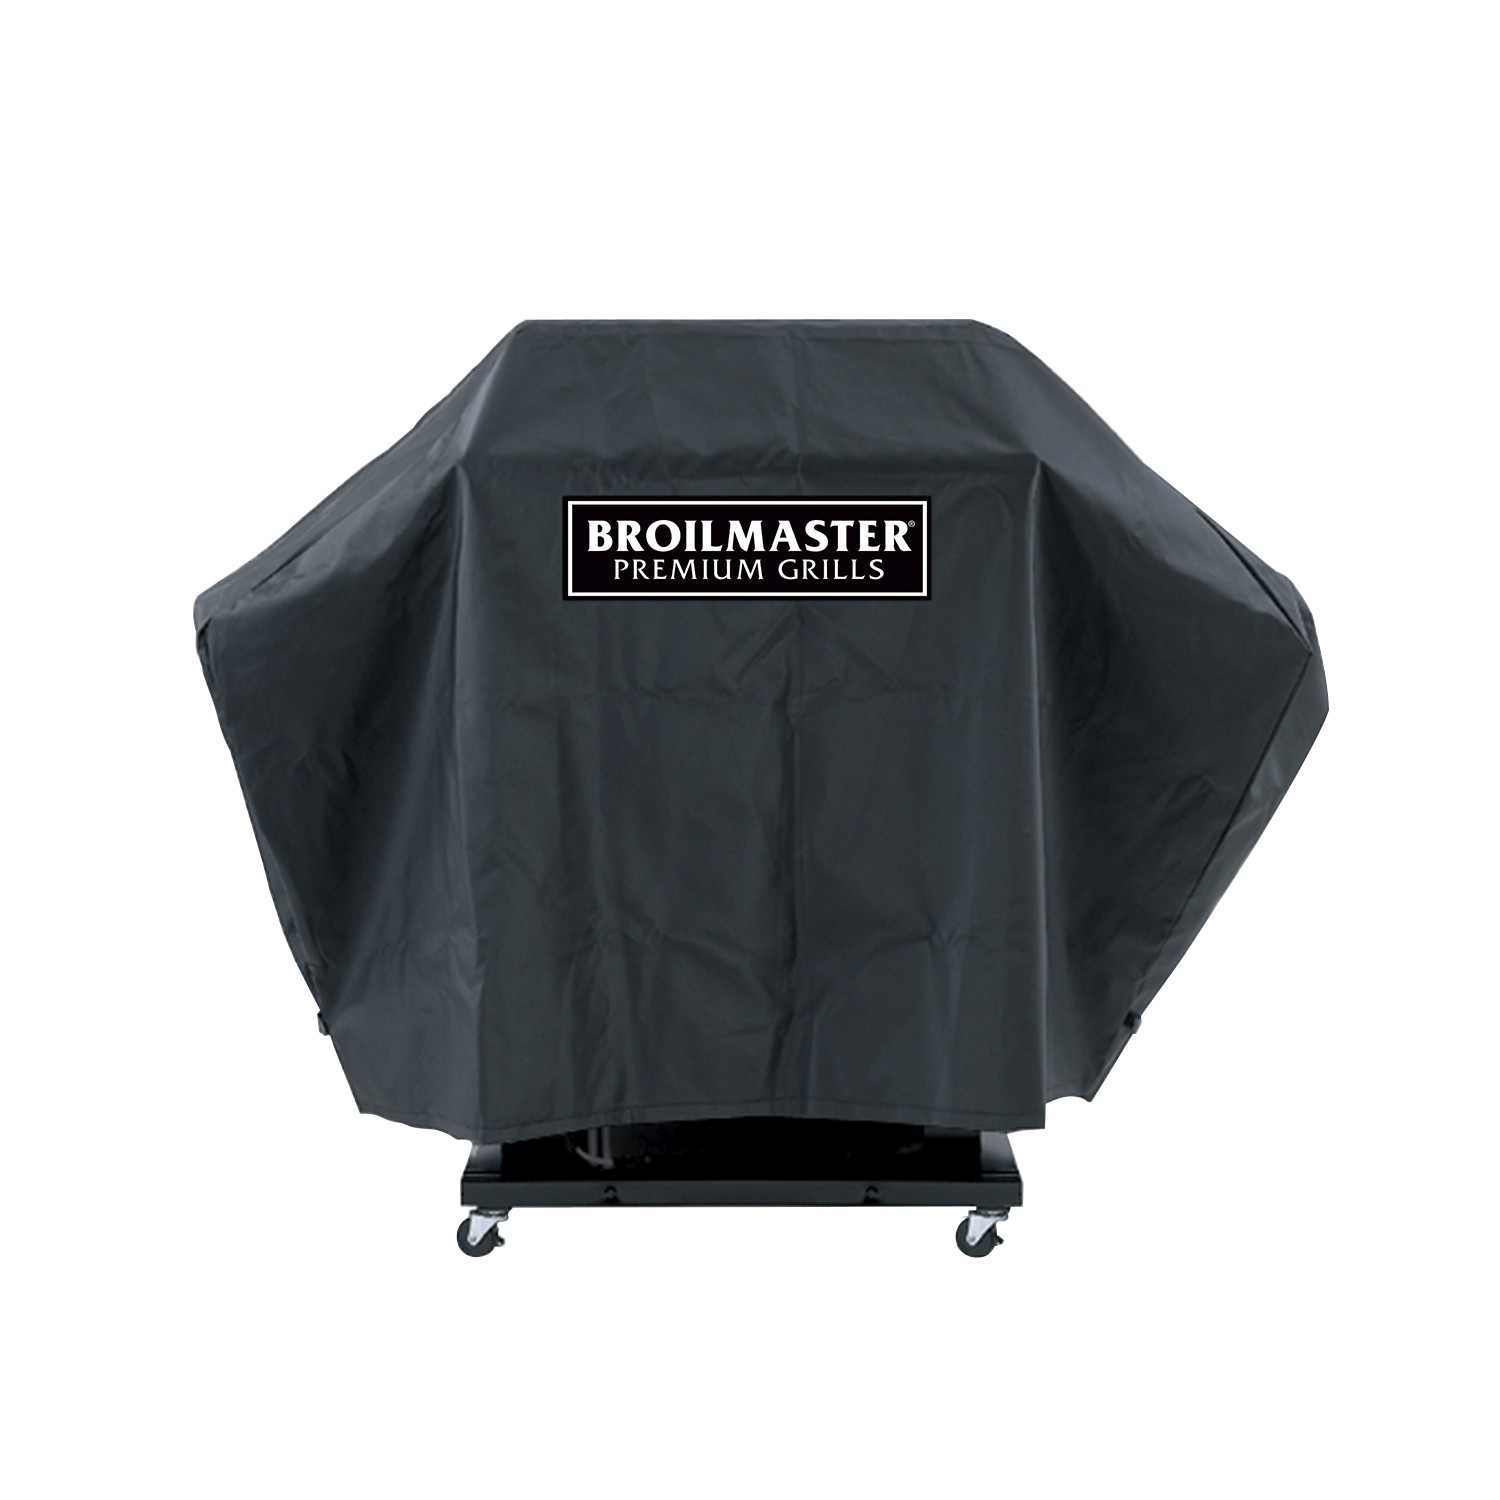 BROILMASTER DPA109 FULL LENGTH COVER FOR BROILMASTER GRILL WITH 1 SIDE SHELF - BLACK